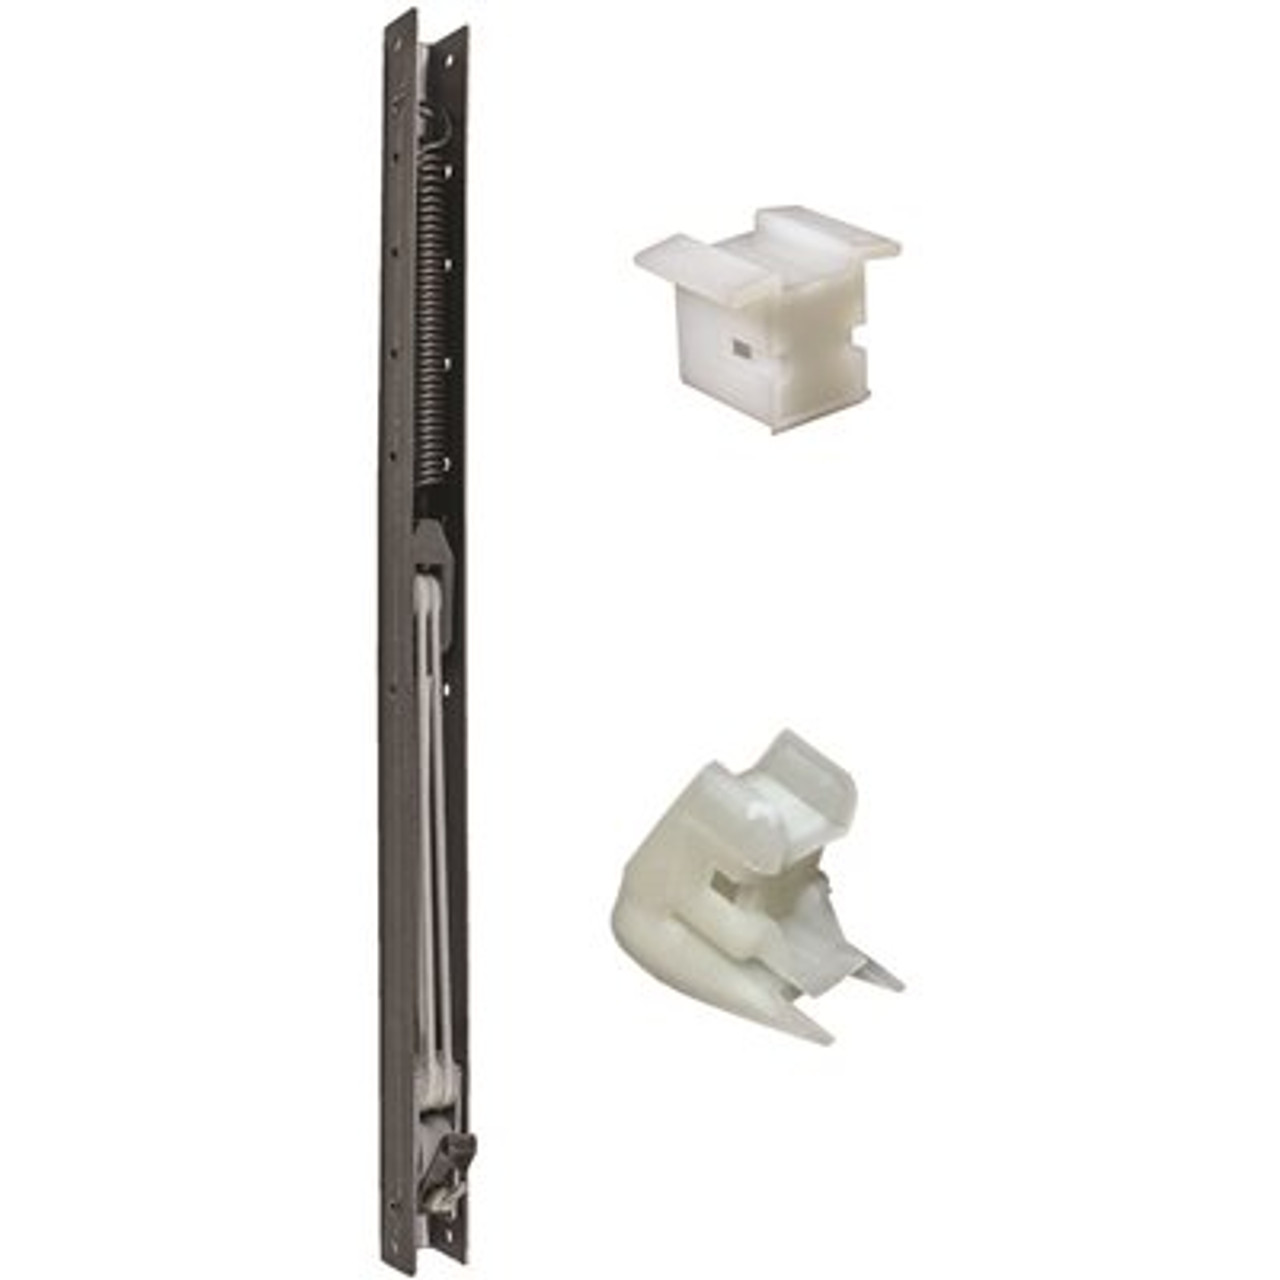 25 In. L Window Channel Balance 2420 With 9/16 In. W X 5/8 In. D Top And Bottom End Brackets Attached